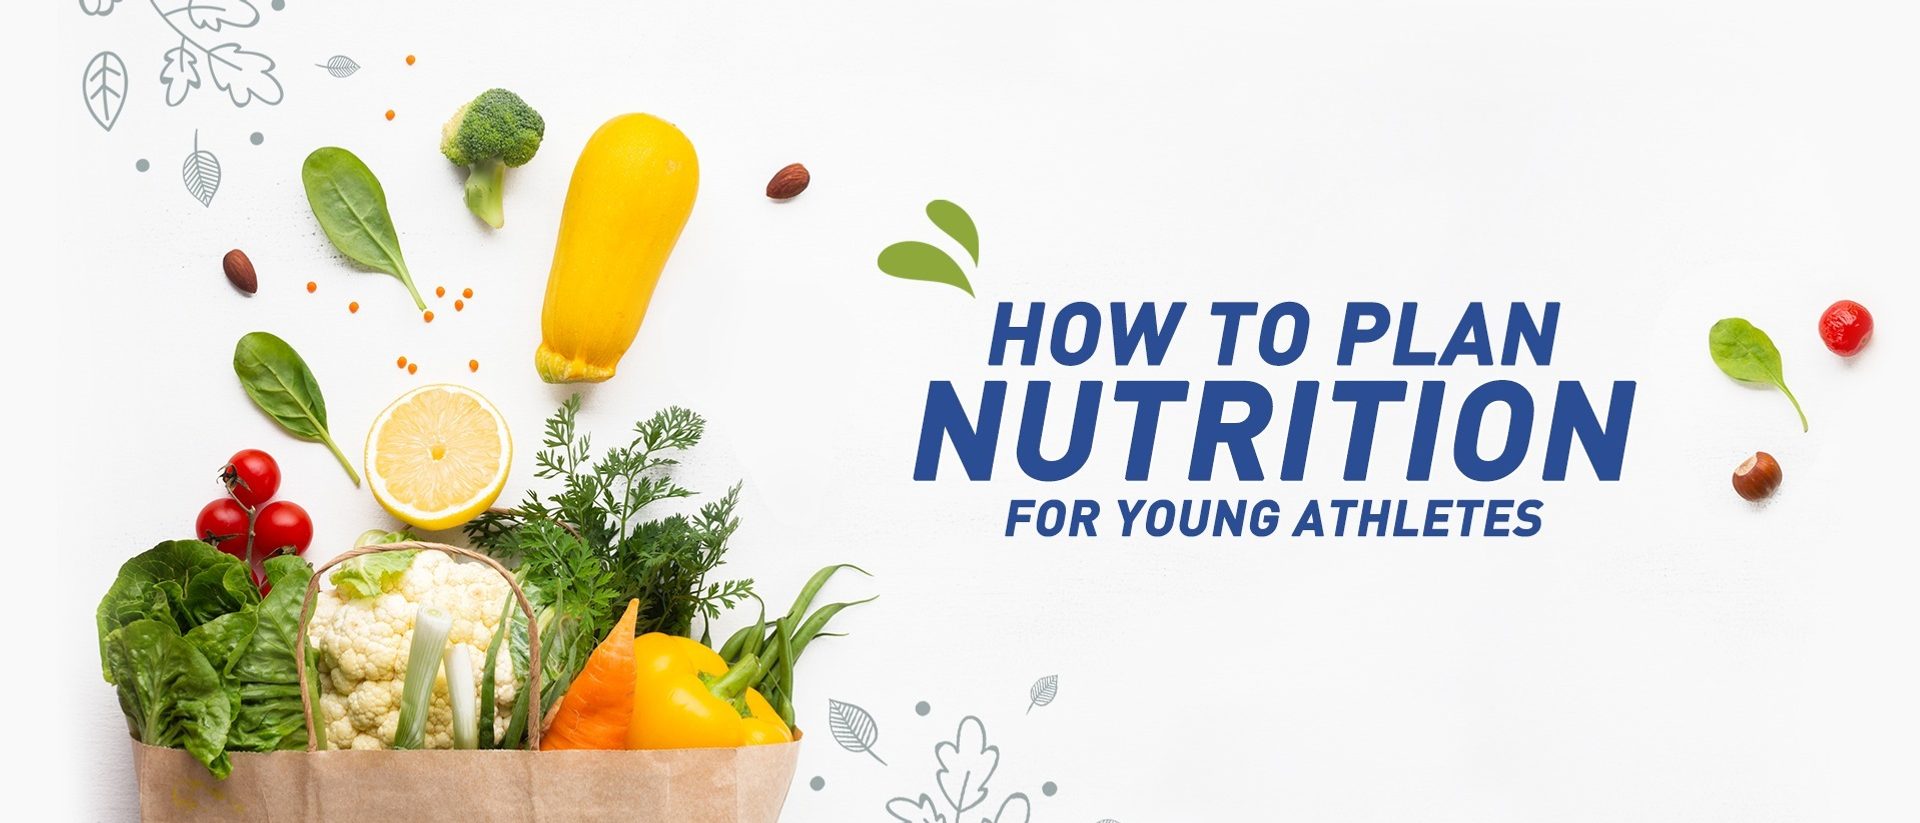 Nutrition for Young Athletes 